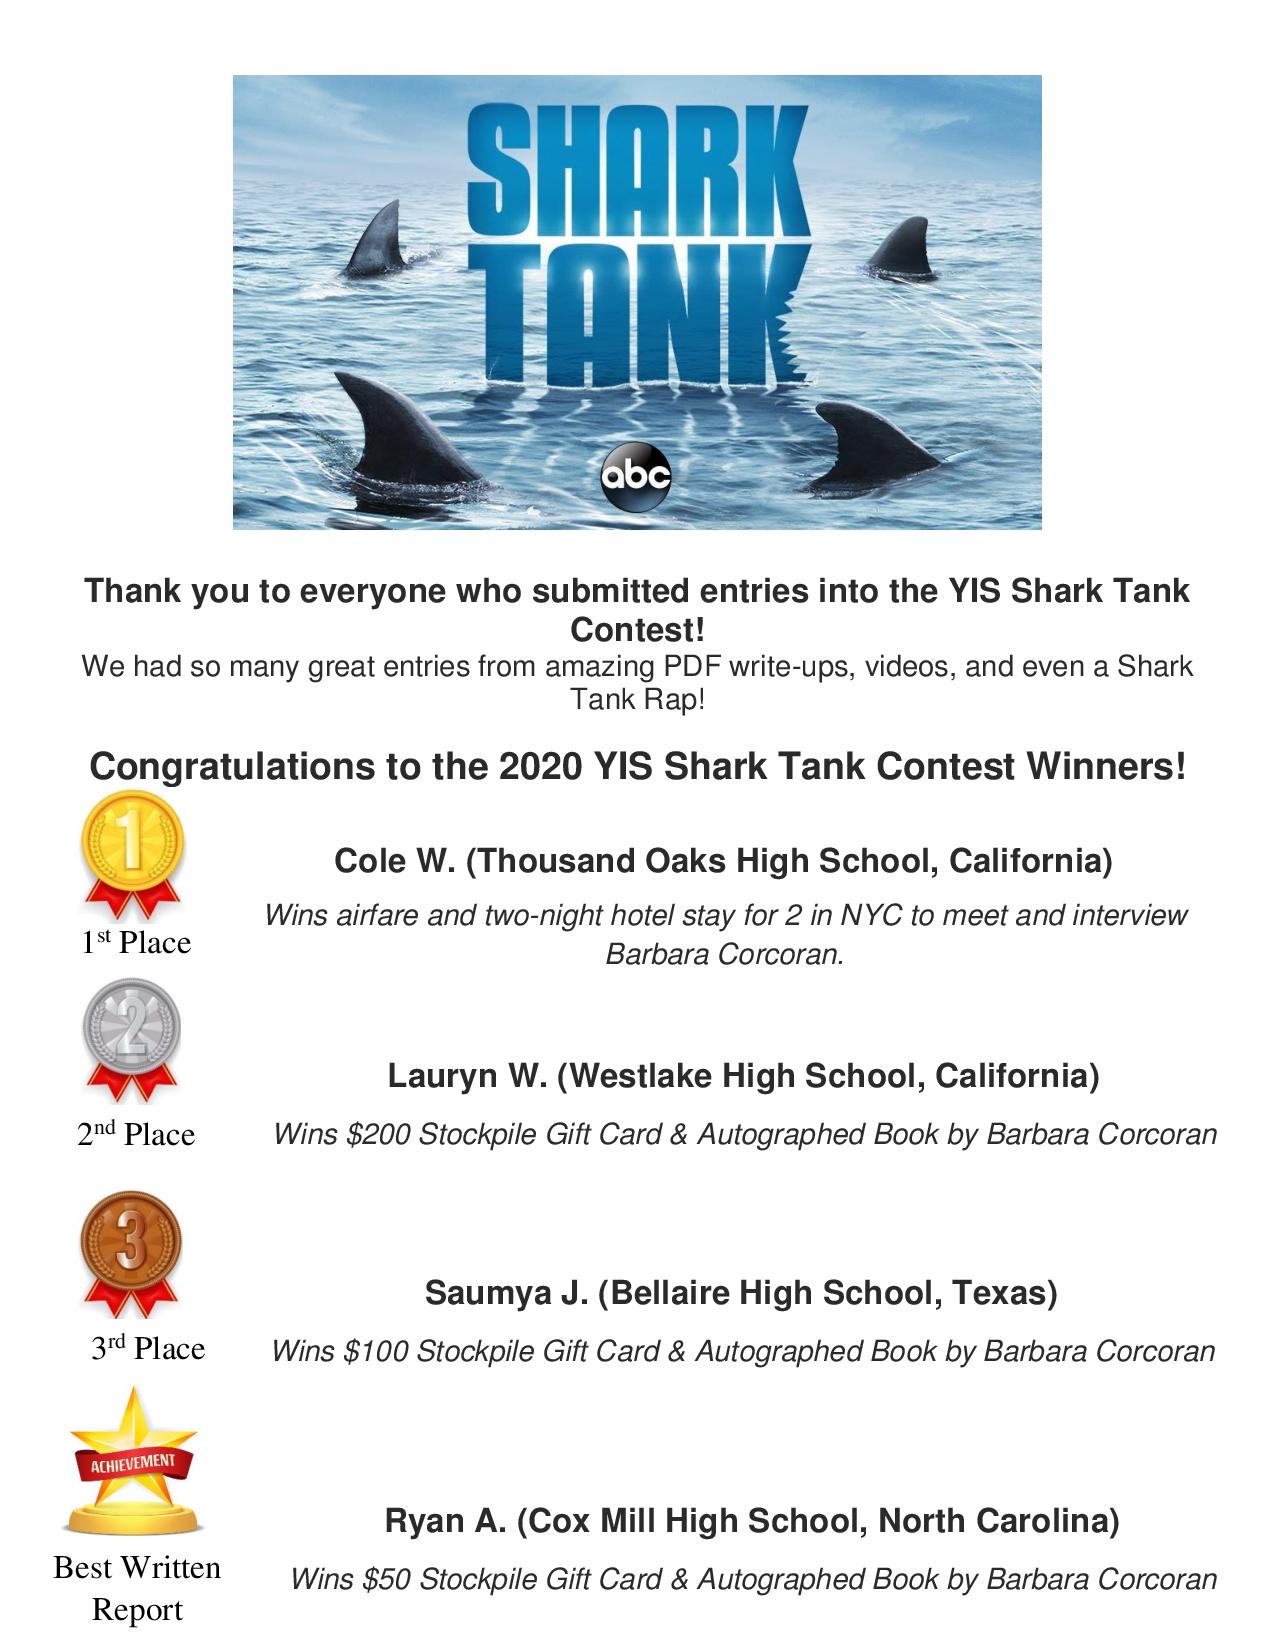 Congratulations to our 2020 Shark Tank Contest Winners!